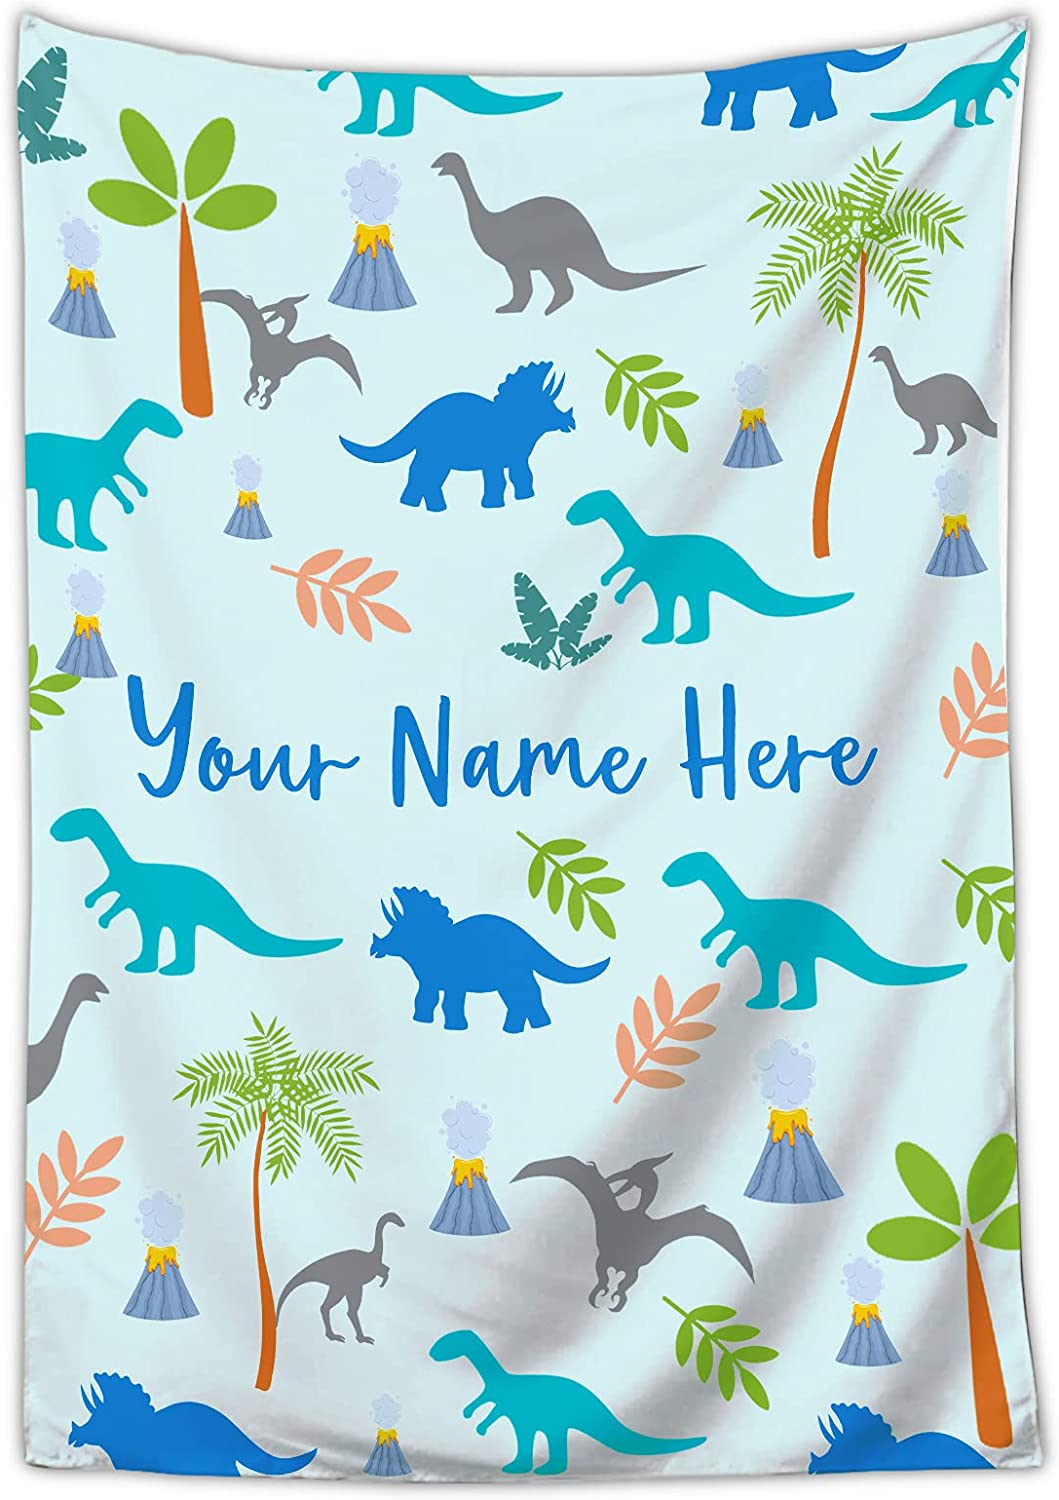 Personalized Custom Baby Blankets with Name for Boys, Dinosaurus Blanket for Infants Newborns Kids